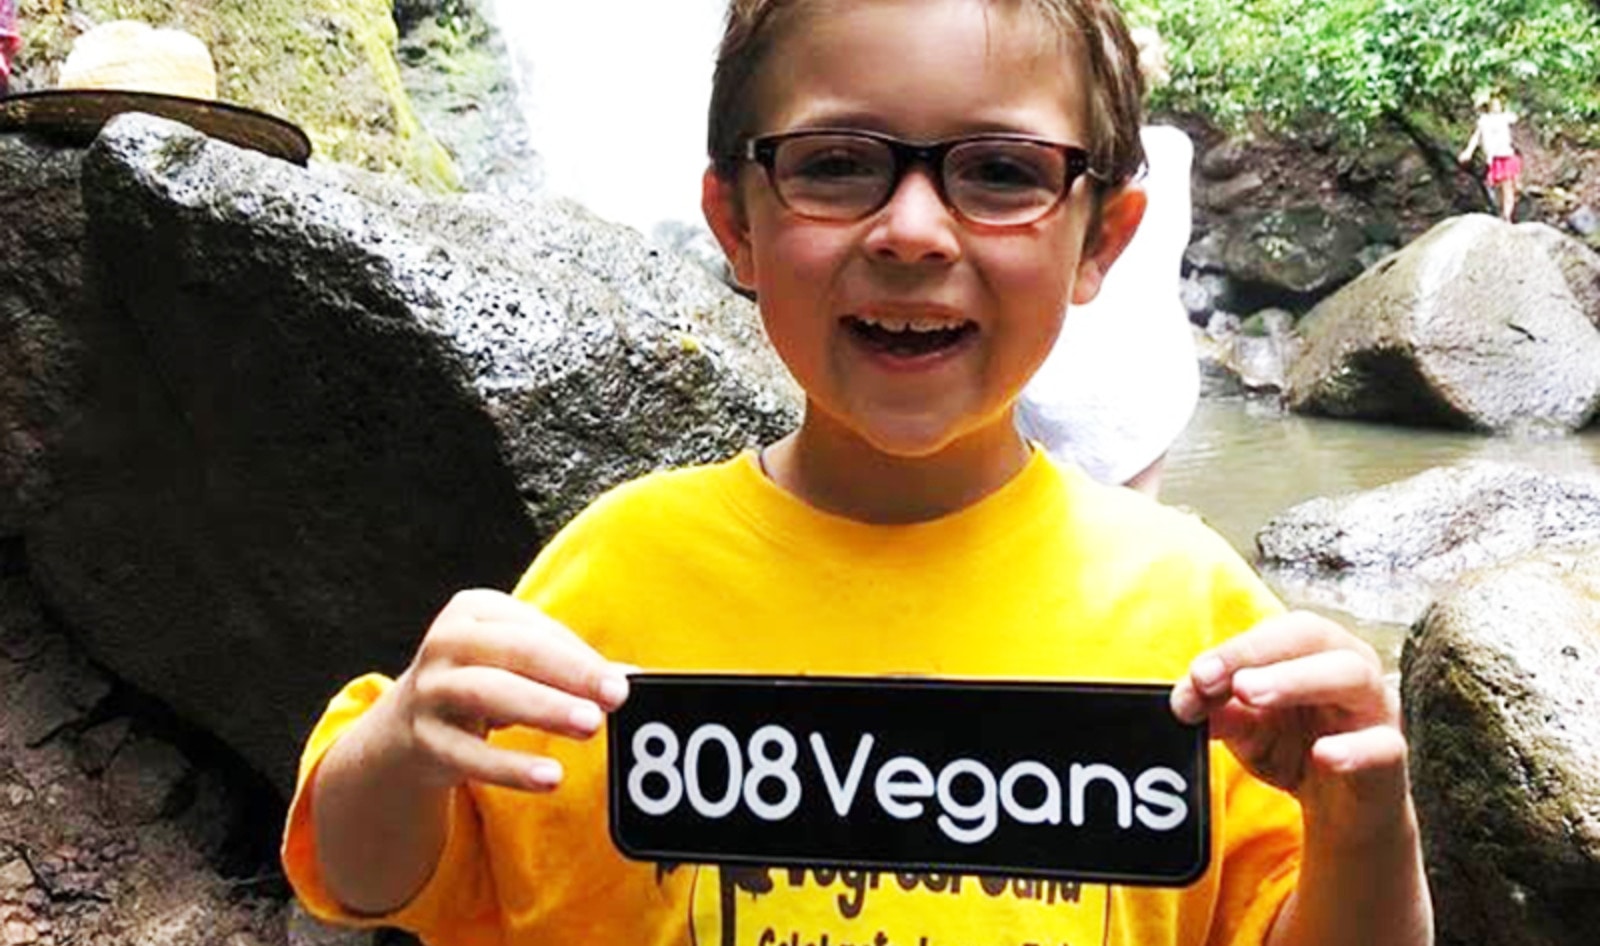 8-Year-Old Activist Tours Hawaii with Vegan Message